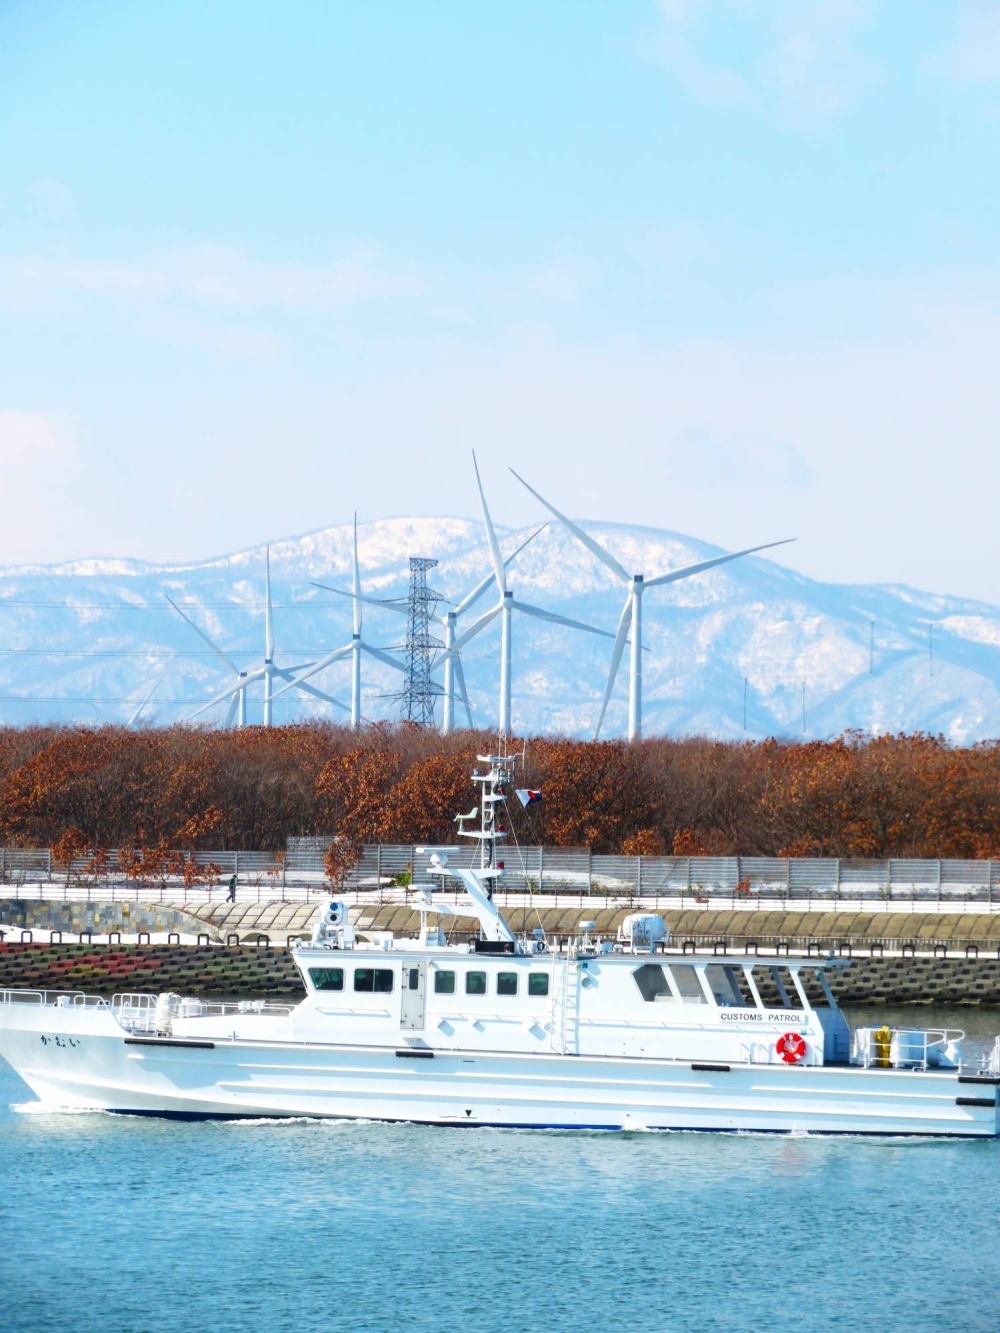 In a sense, Ishikari represents the idealized version of Hokkaido for many Japanese, as well as for foreign tourists: Its coastal waters are famous for their seafood, while the city’s nature trails and parks are home to dozens of varieties of flowers. It's also drawing attention as a wind power hub, despite the ire of some residents. 